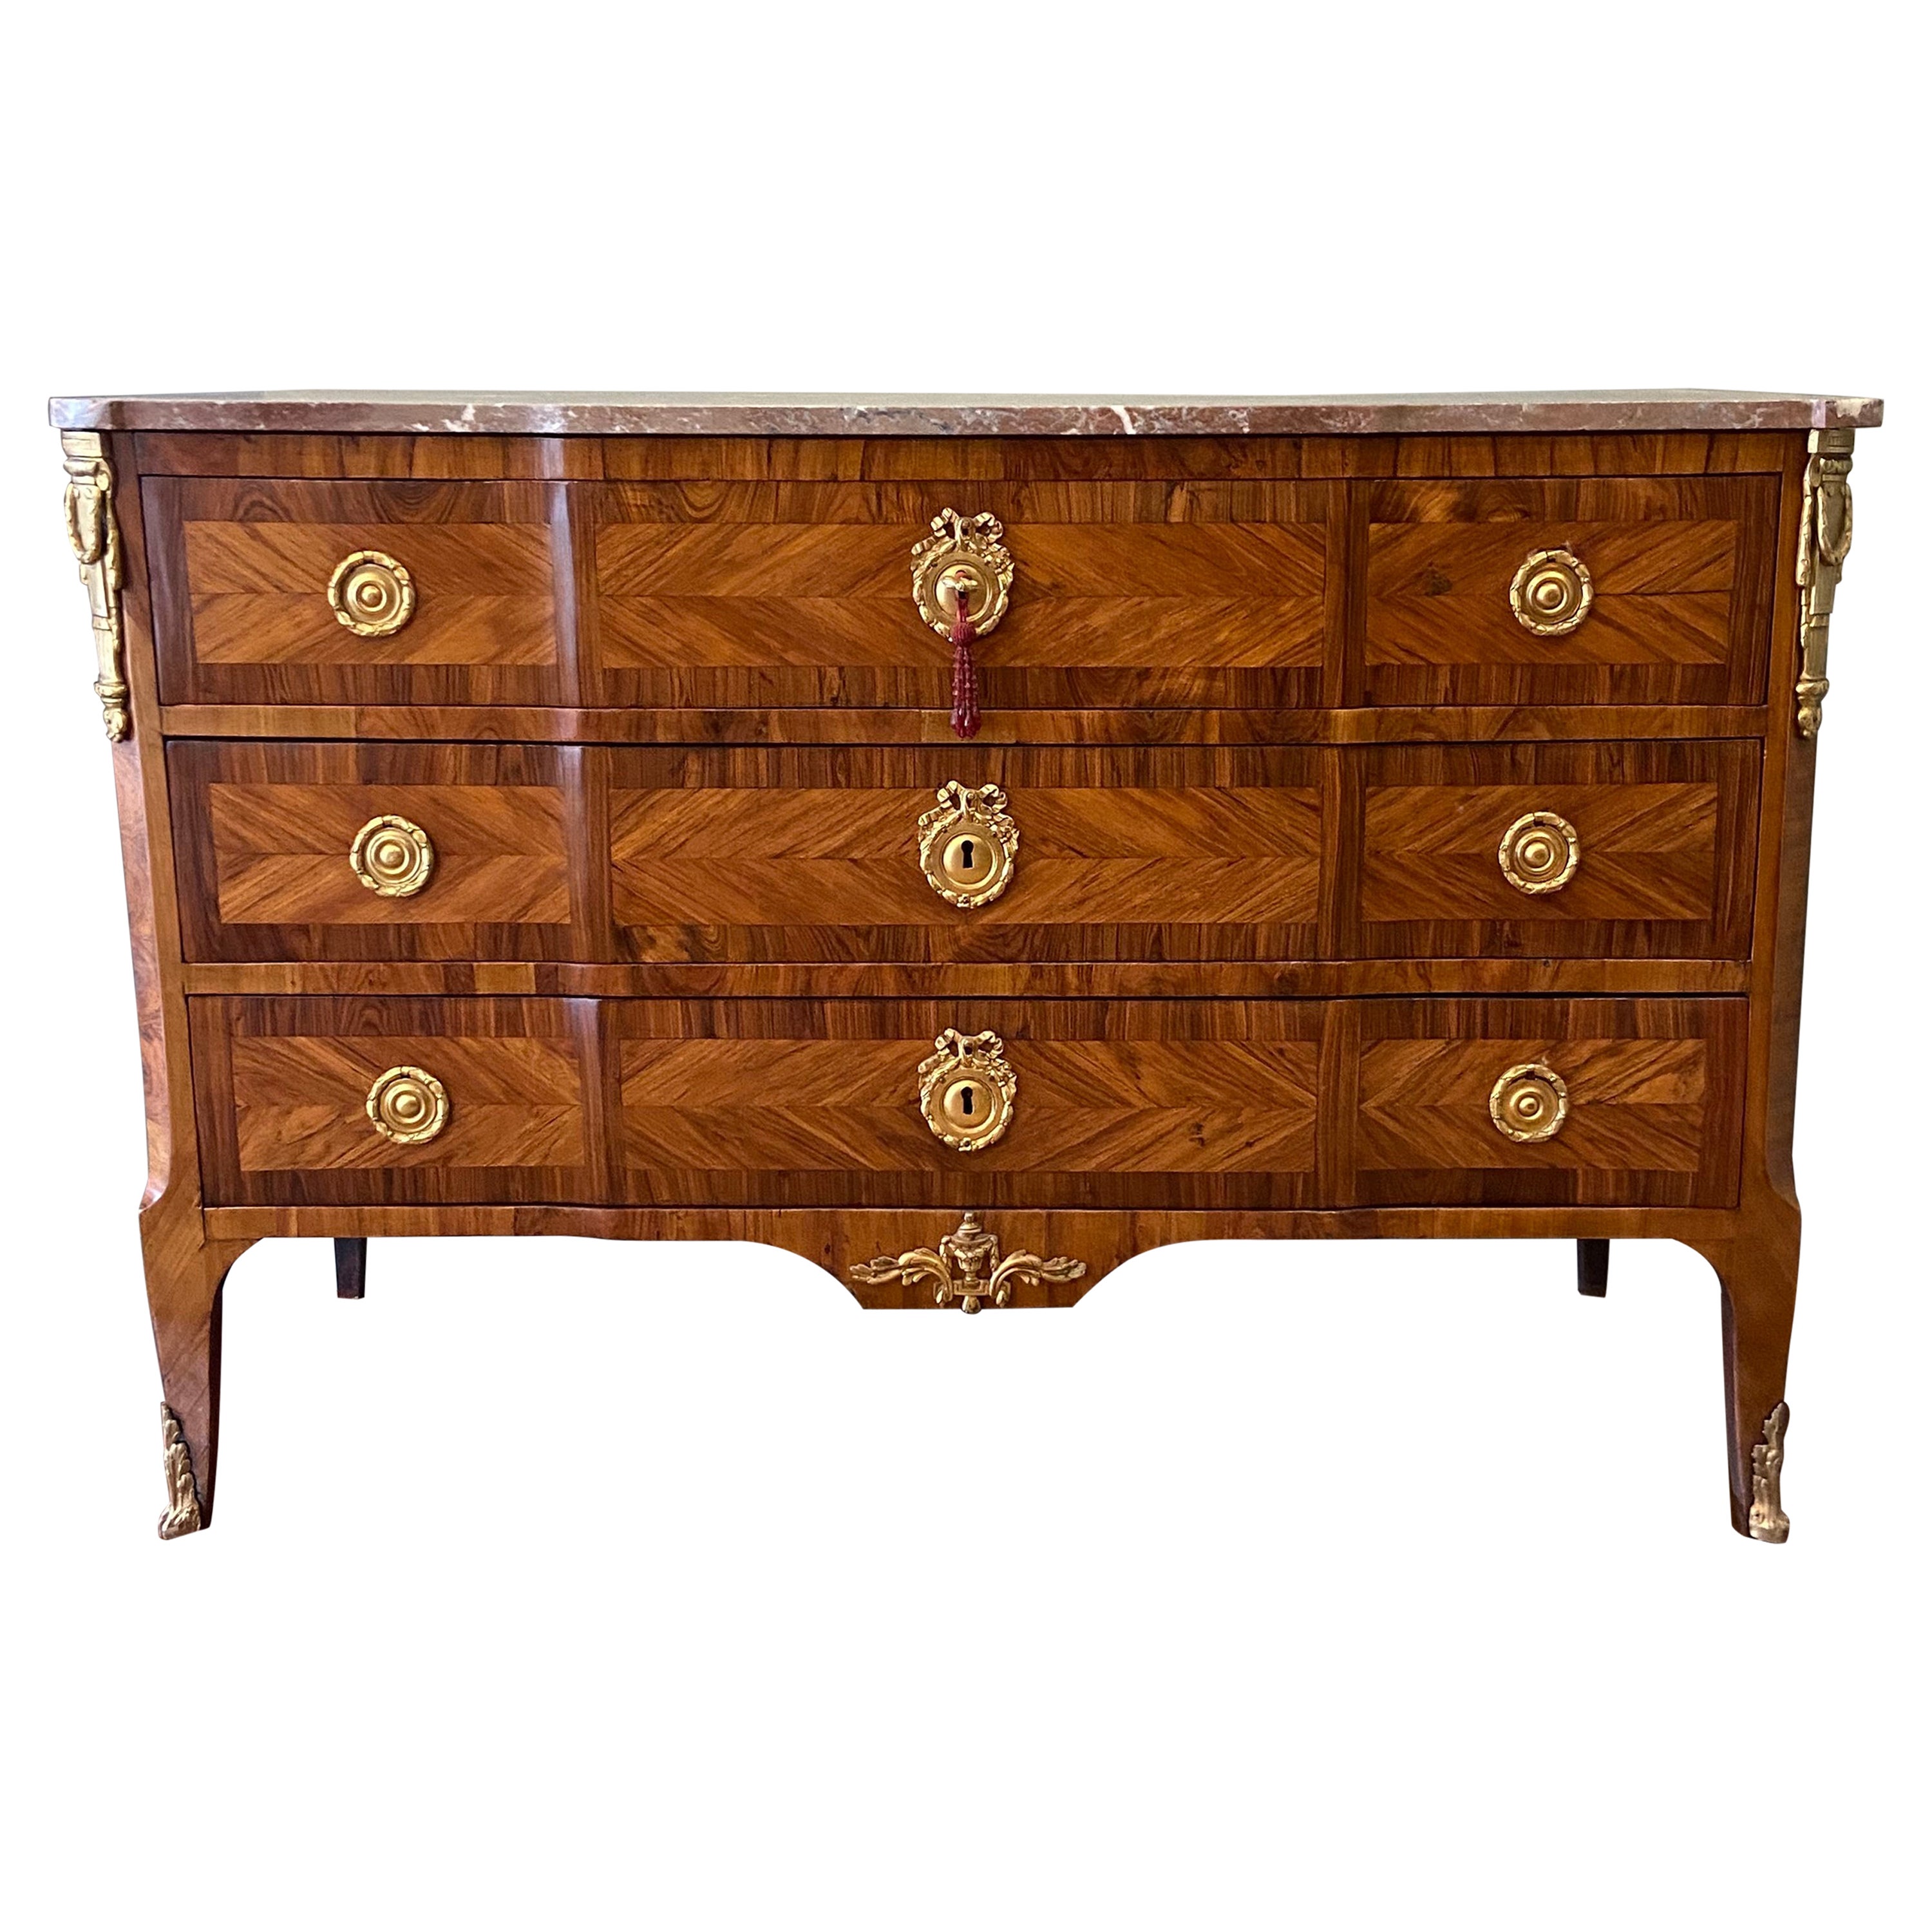 Louis XV Ormolu-Mounted Kingwood and Fruitwood Commode 'Mid 18th Century'